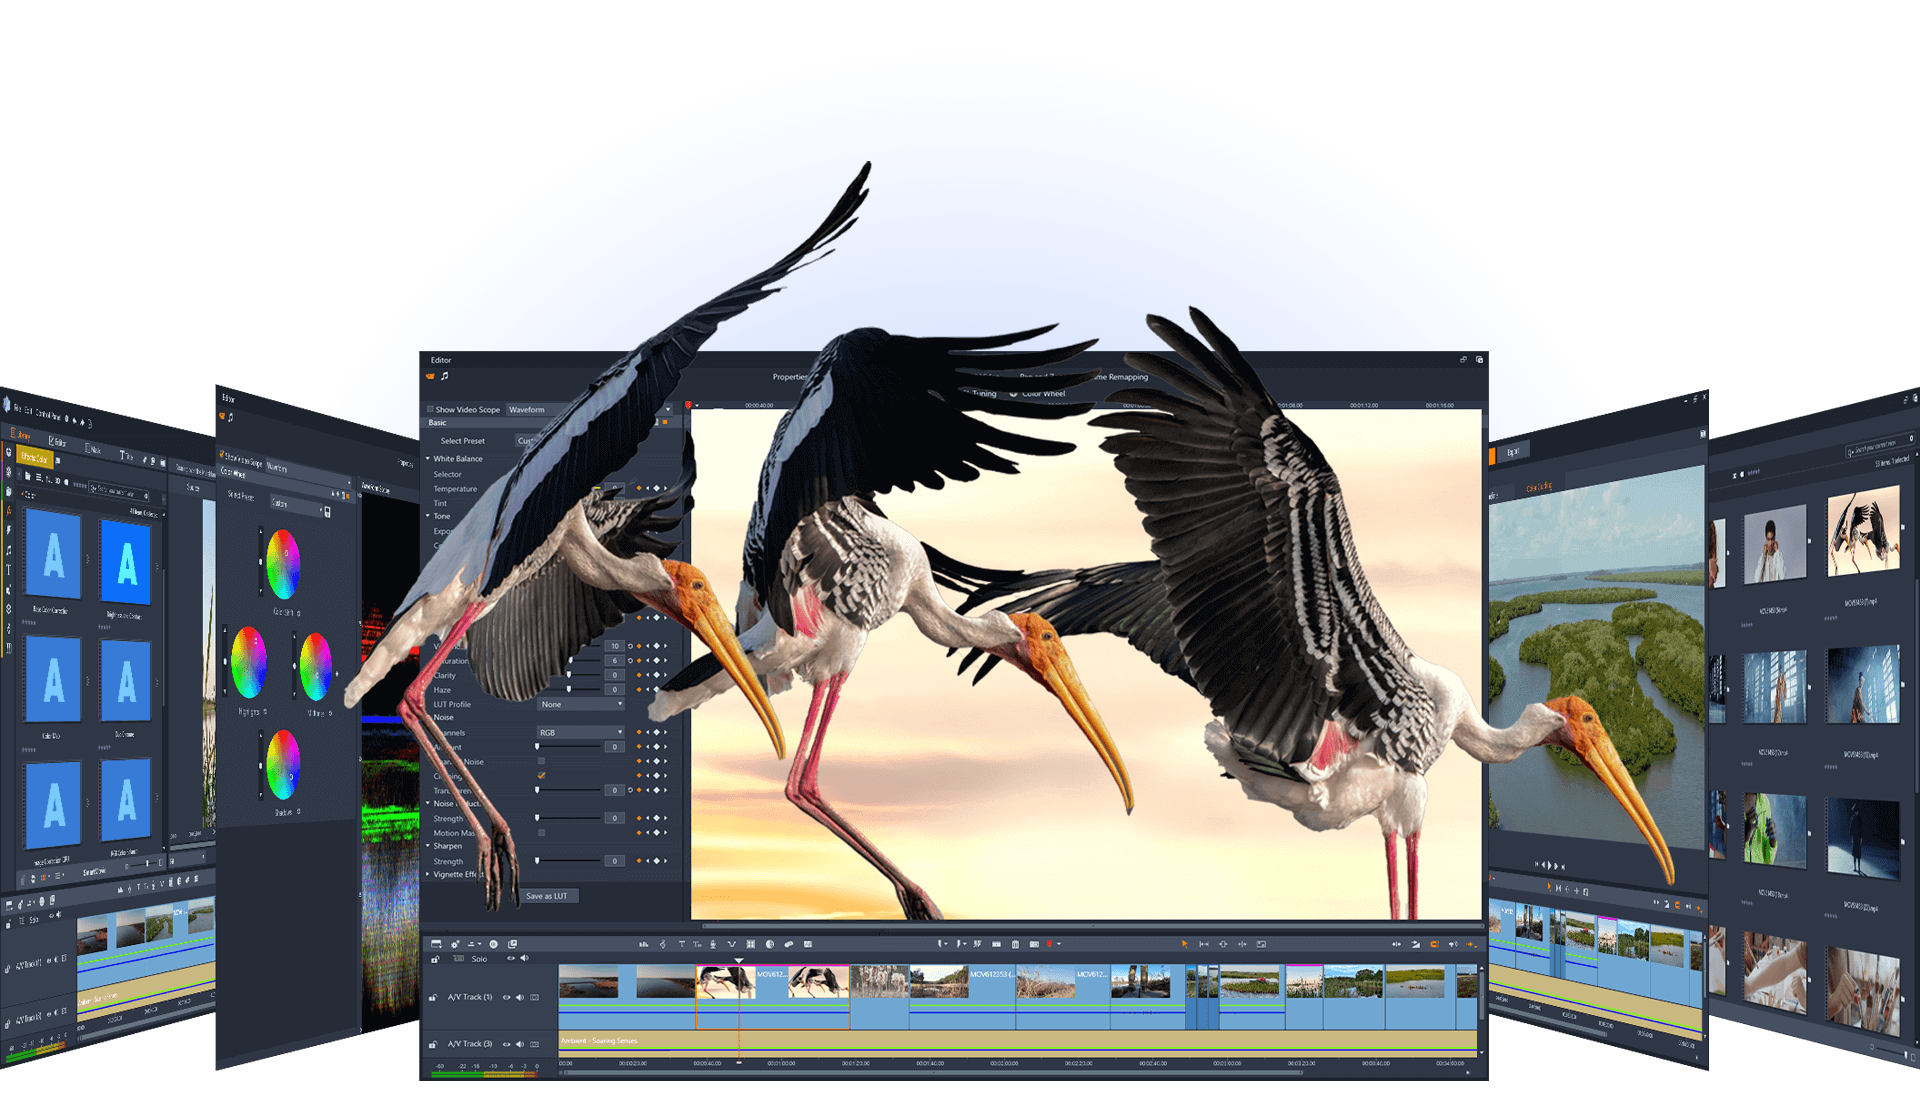 Hue Animation Studio: Complete Stop Motion Animation Kit with Camera Software and Book for Windows (Blue)